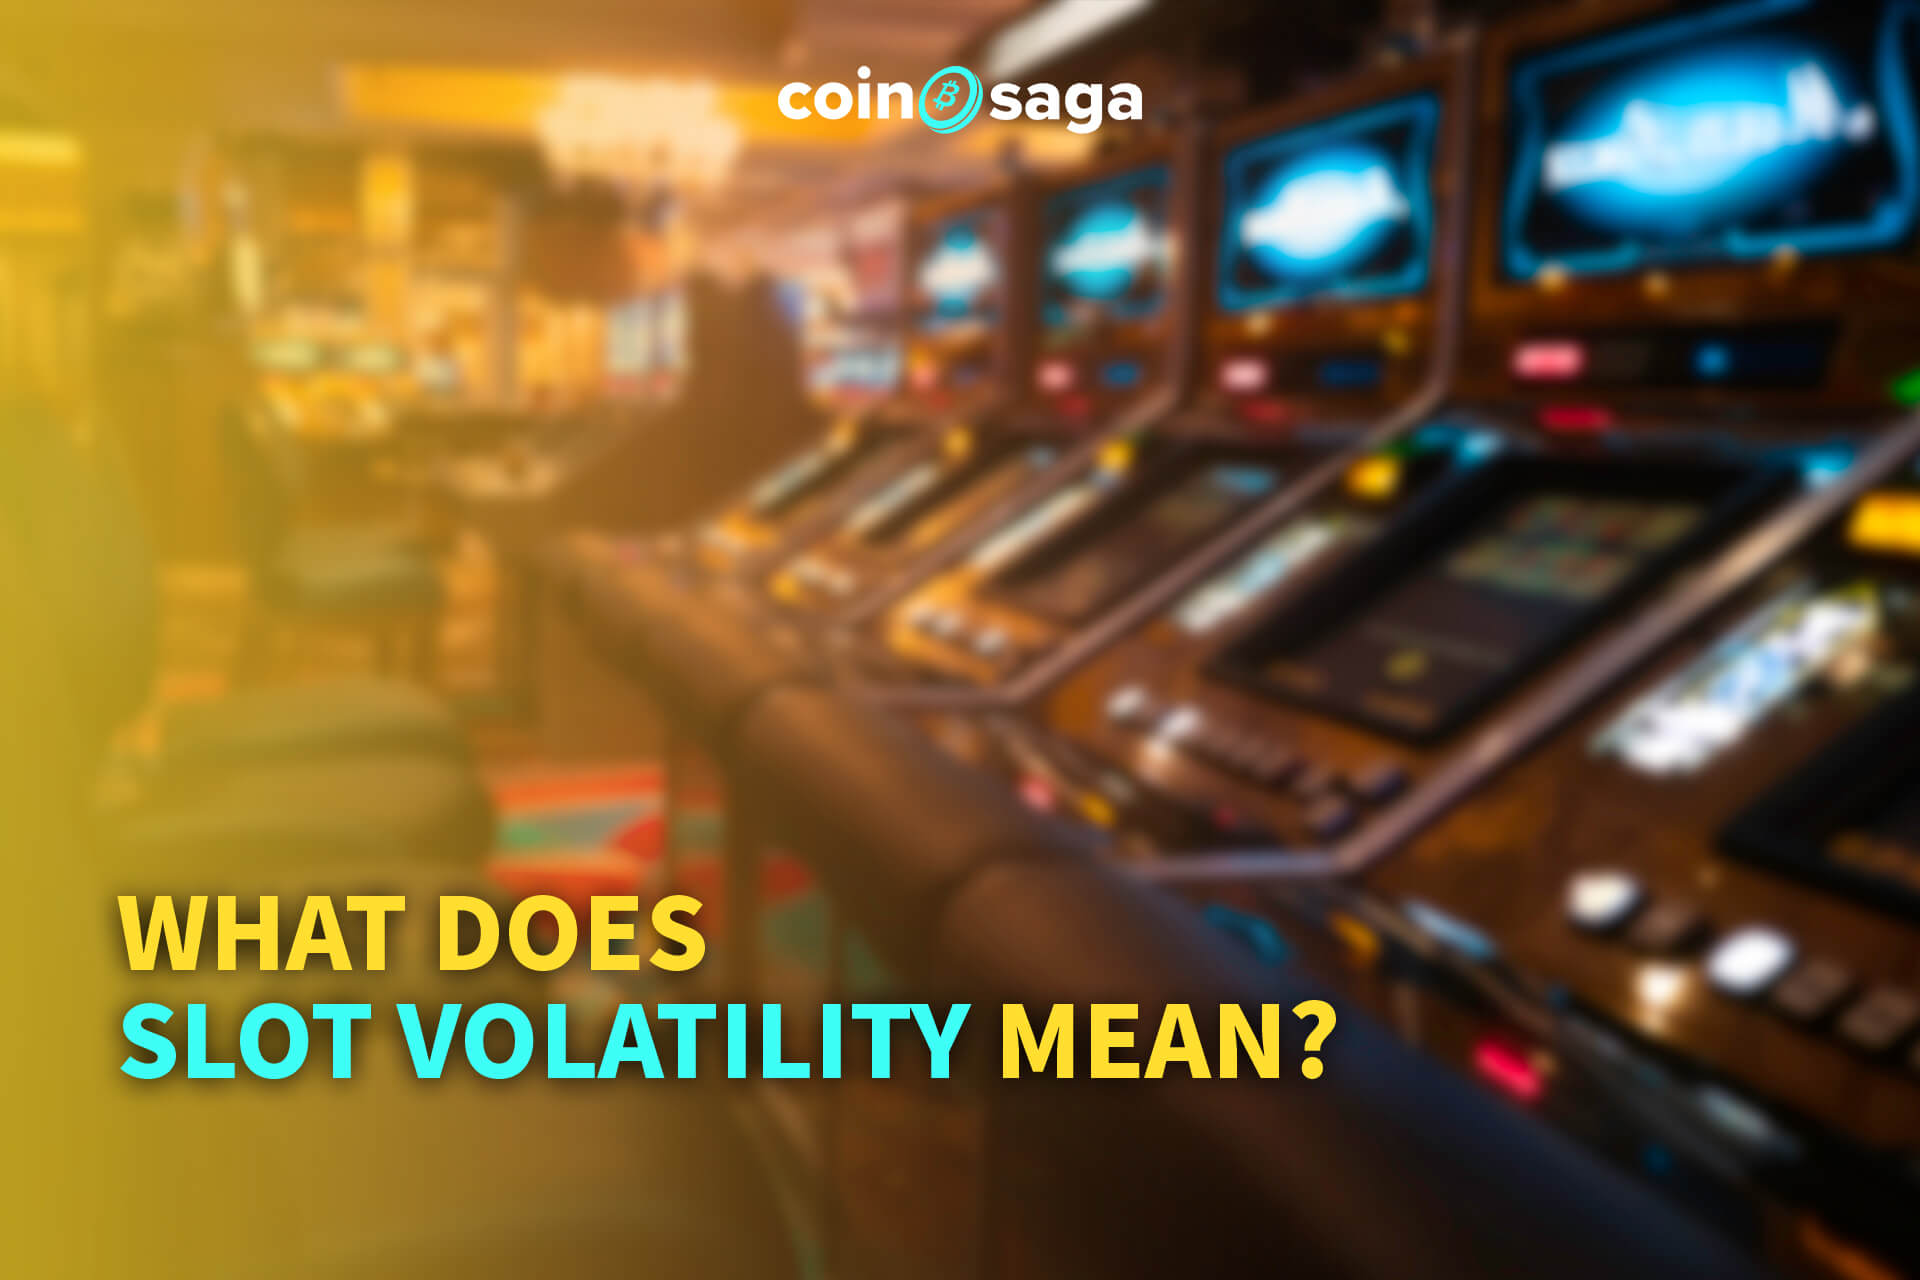 What does slot volatility mean